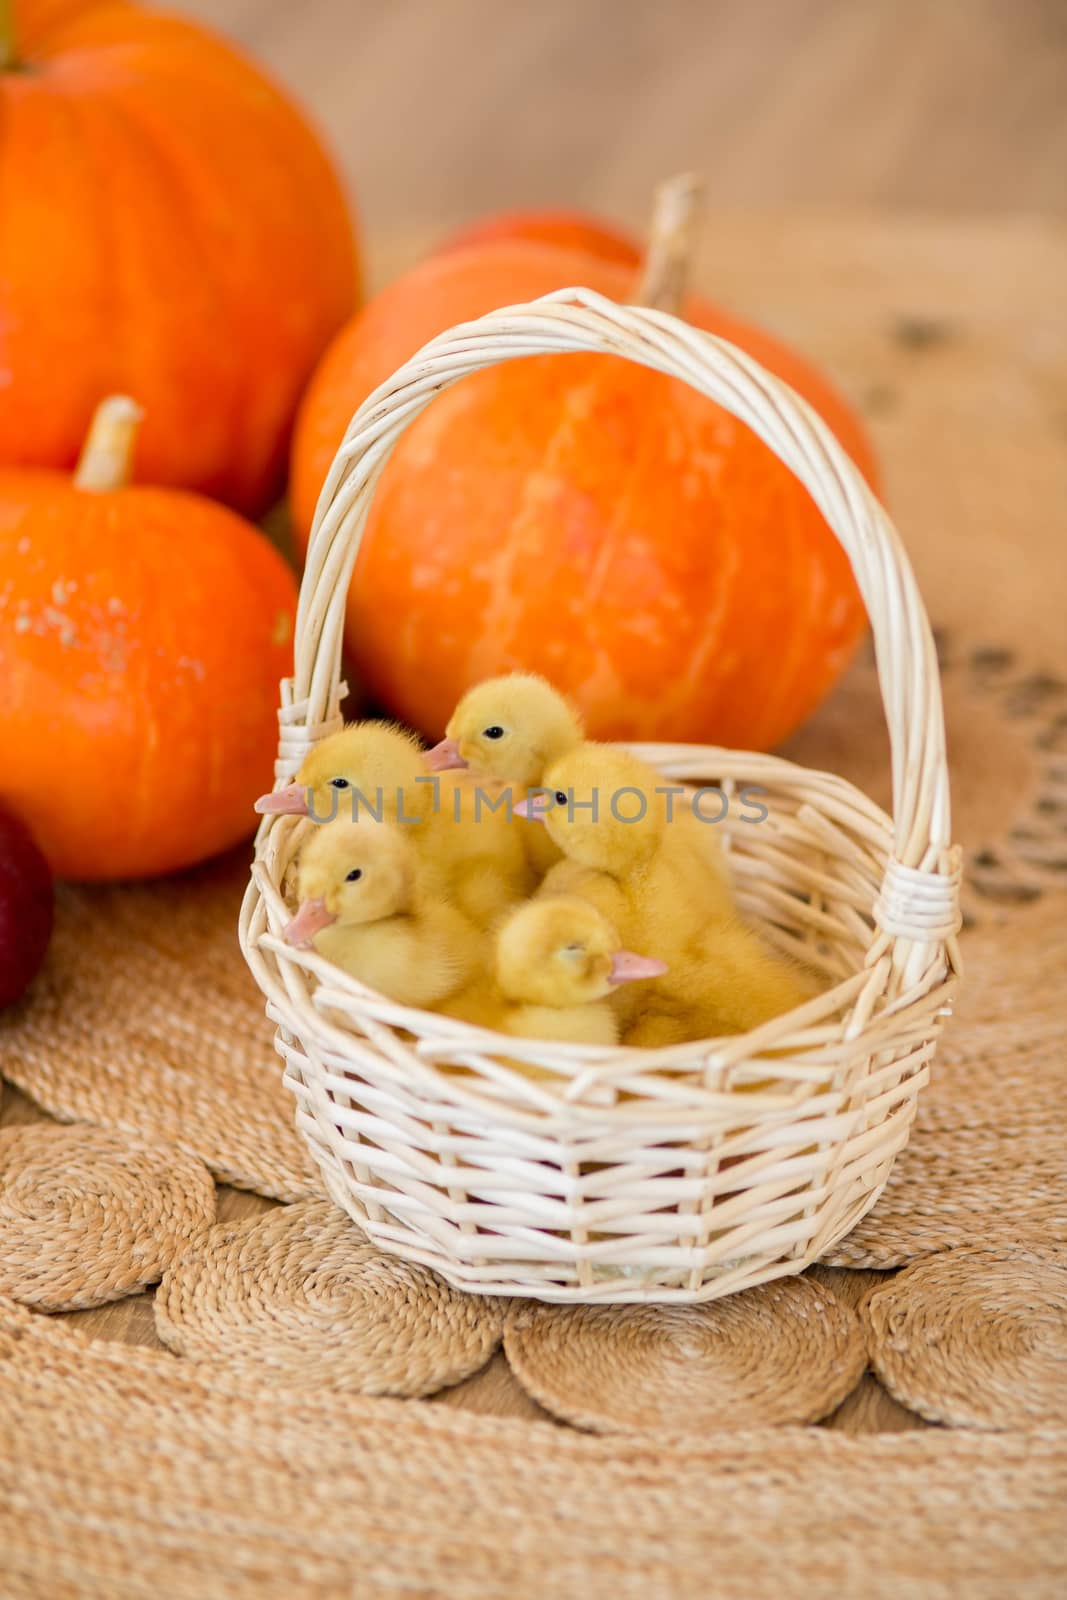 Small yellow ducklings are sitting in a basket in beautiful studio by galinasharapova